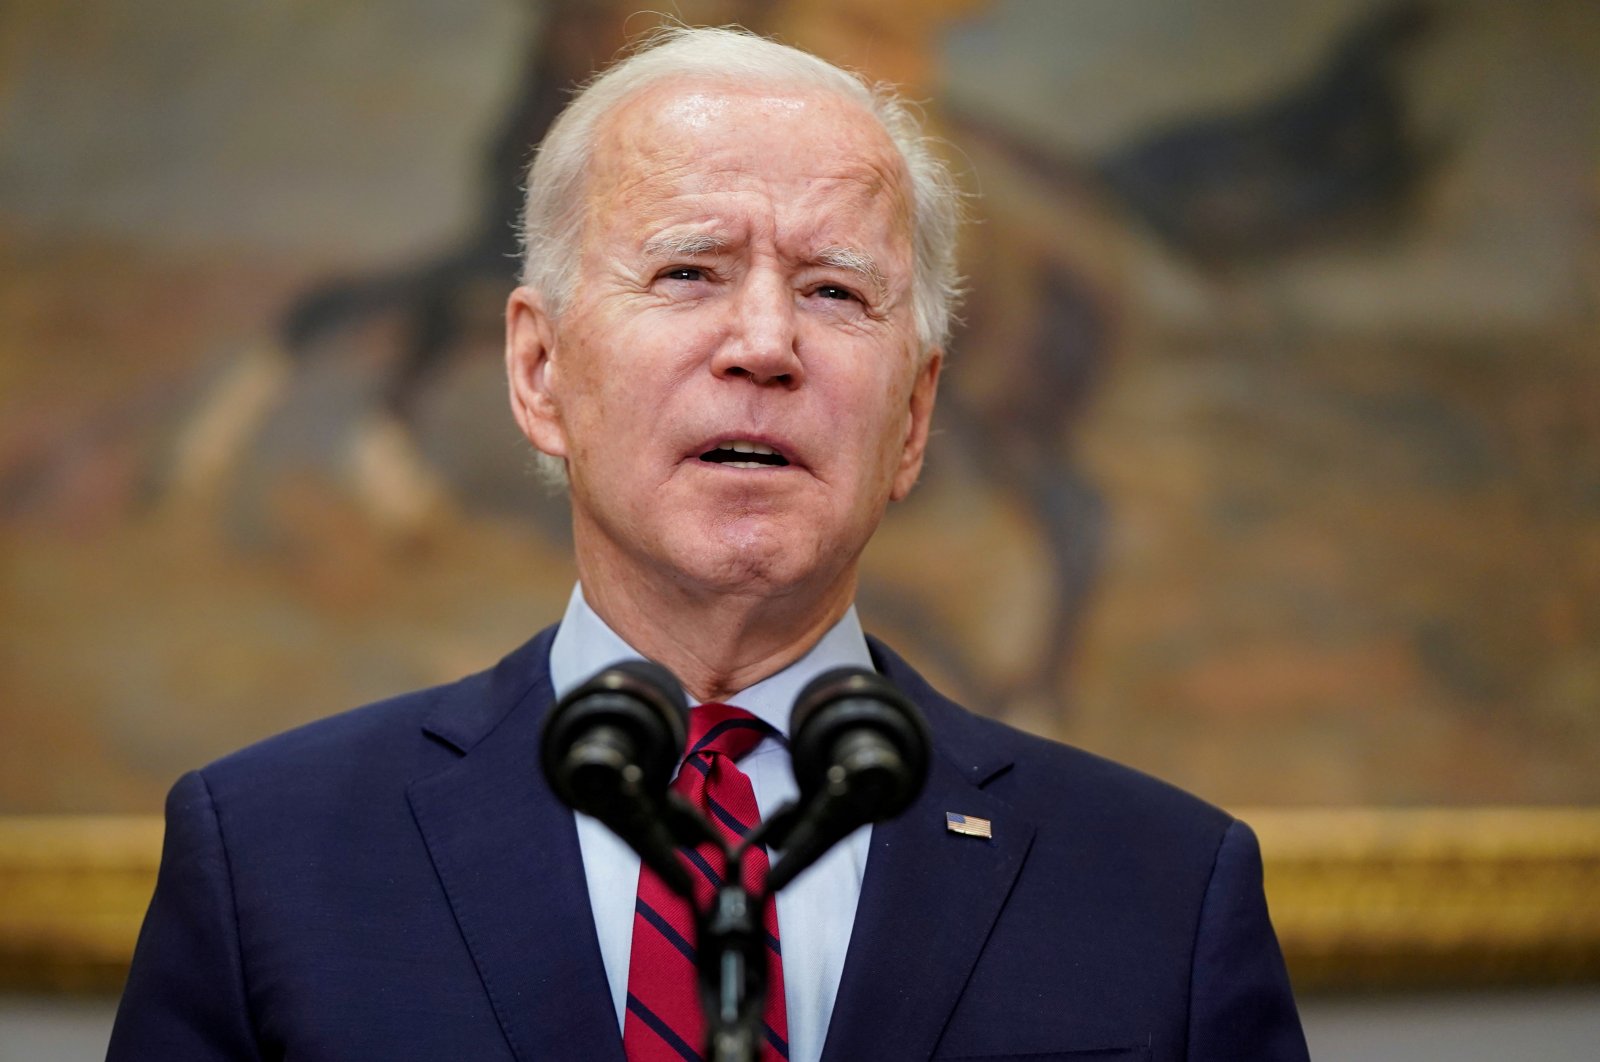 U.S. President Joe Biden speaks after the House of Representatives passed his $1.9 trillion coronavirus relief package in the Roosevelt Room of the White House in Washington, D.C., U.S., Feb. 27, 2021. (Reuters Photo)